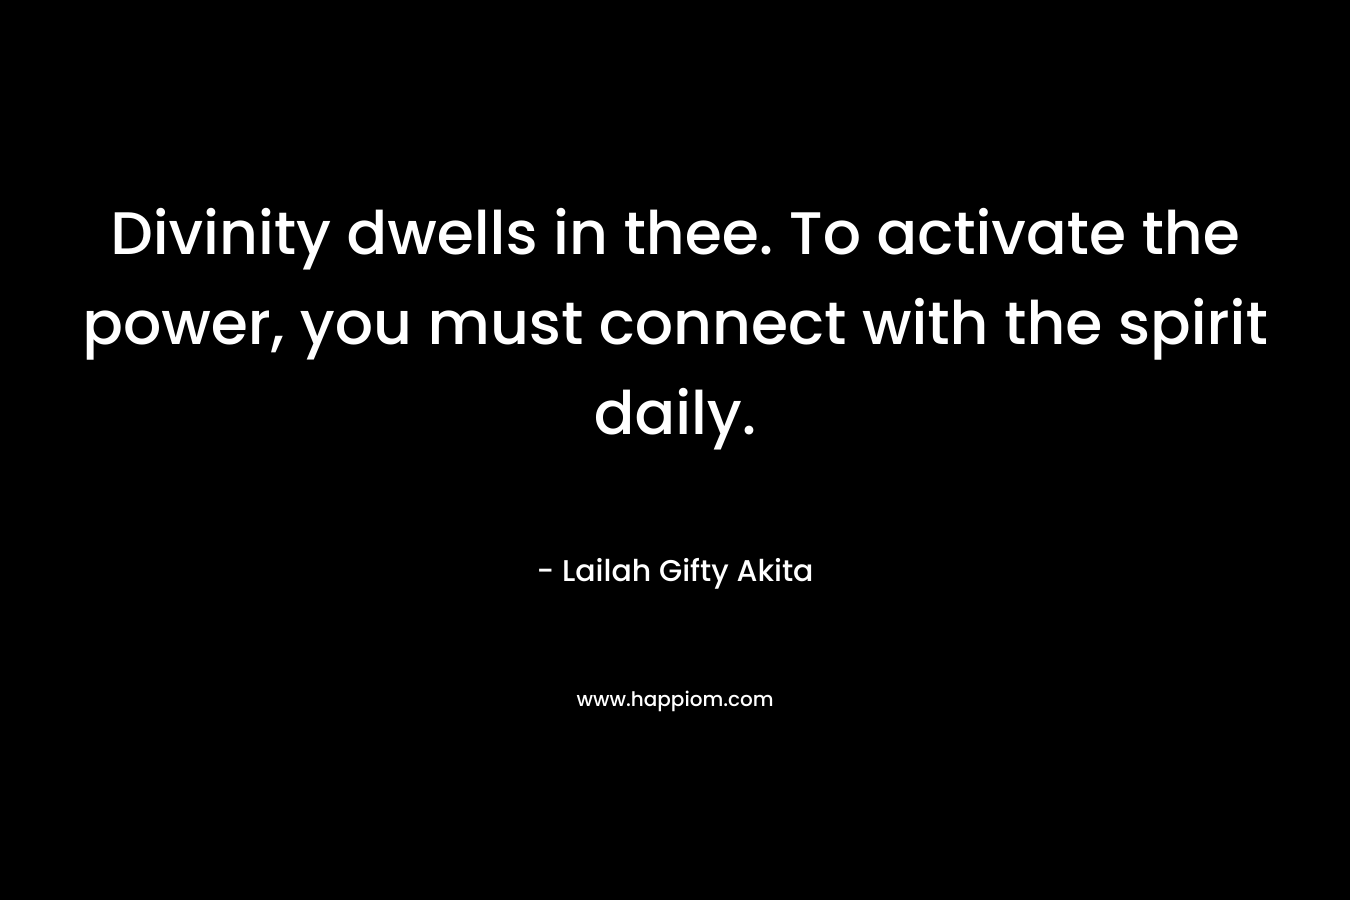 Divinity dwells in thee. To activate the power, you must connect with the spirit daily.